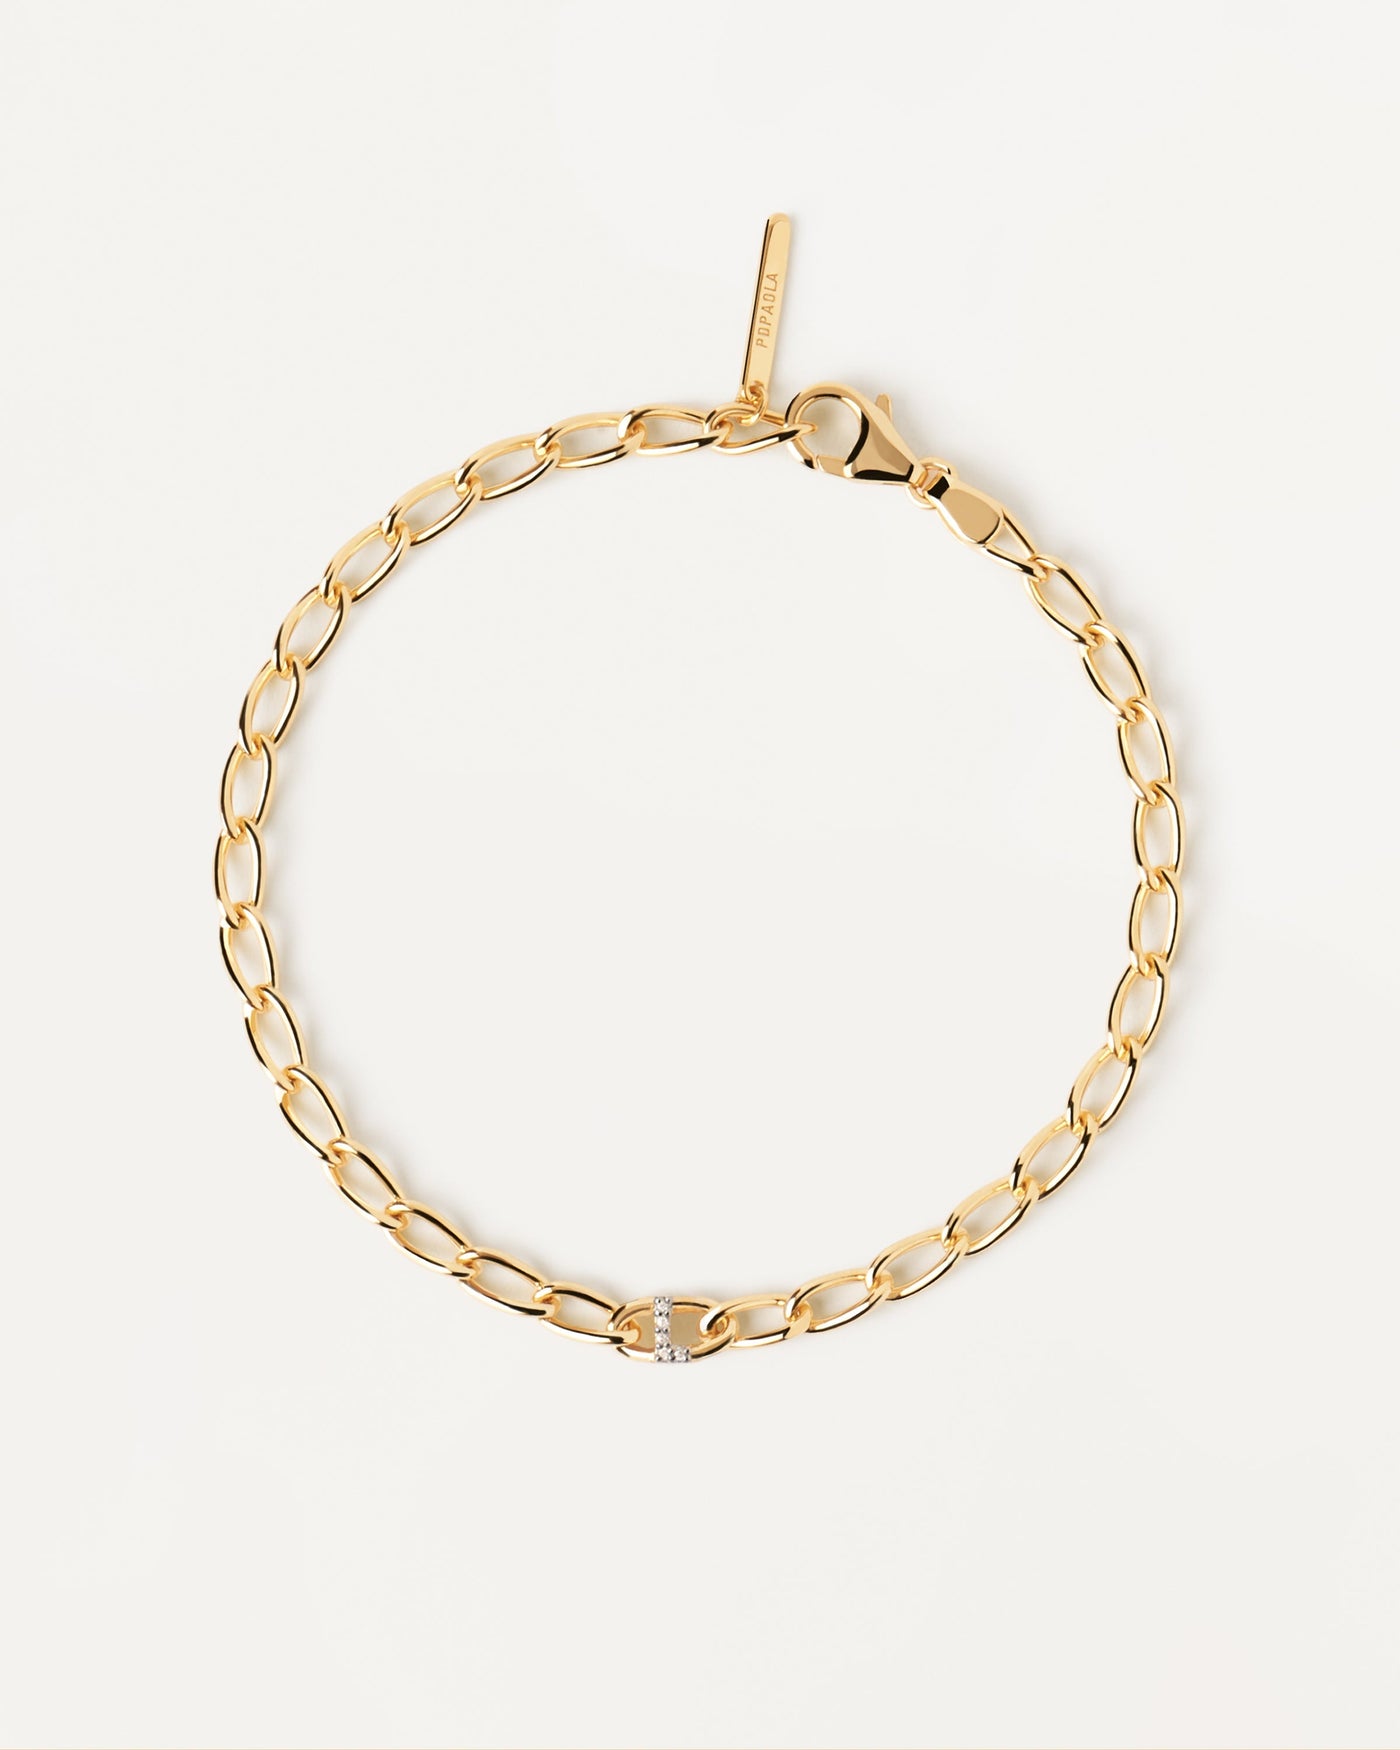 2023 Selection | Letter L Chain Bracelet. cable chain bracelet in gold-plated silver with initial L in zirconia. Get the latest arrival from PDPAOLA. Place your order safely and get this Best Seller. Free Shipping.